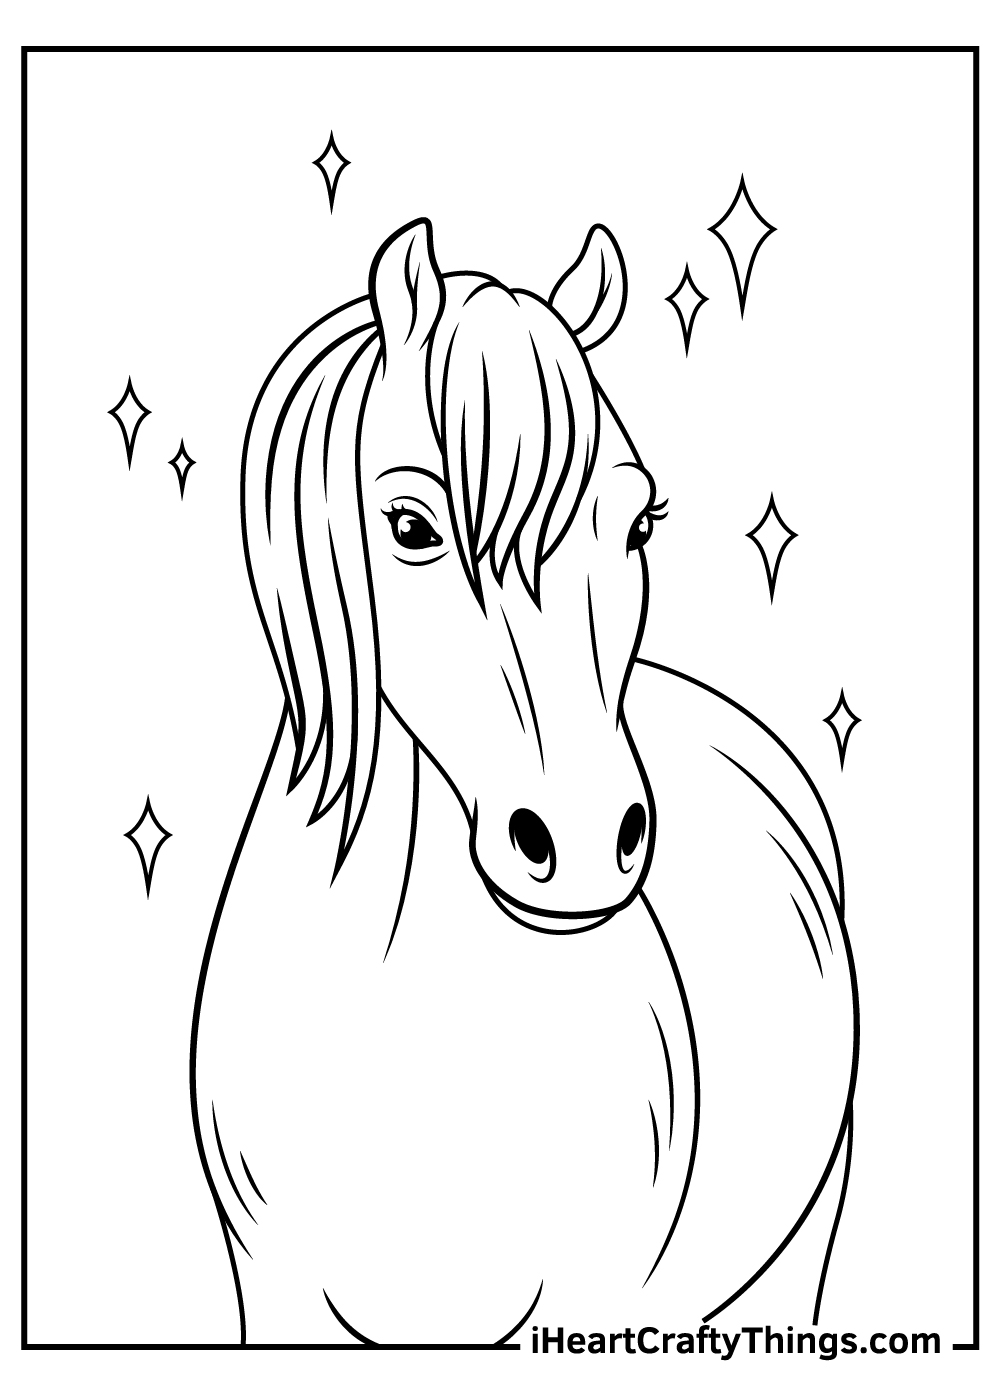 Realistic horse coloring pages updated